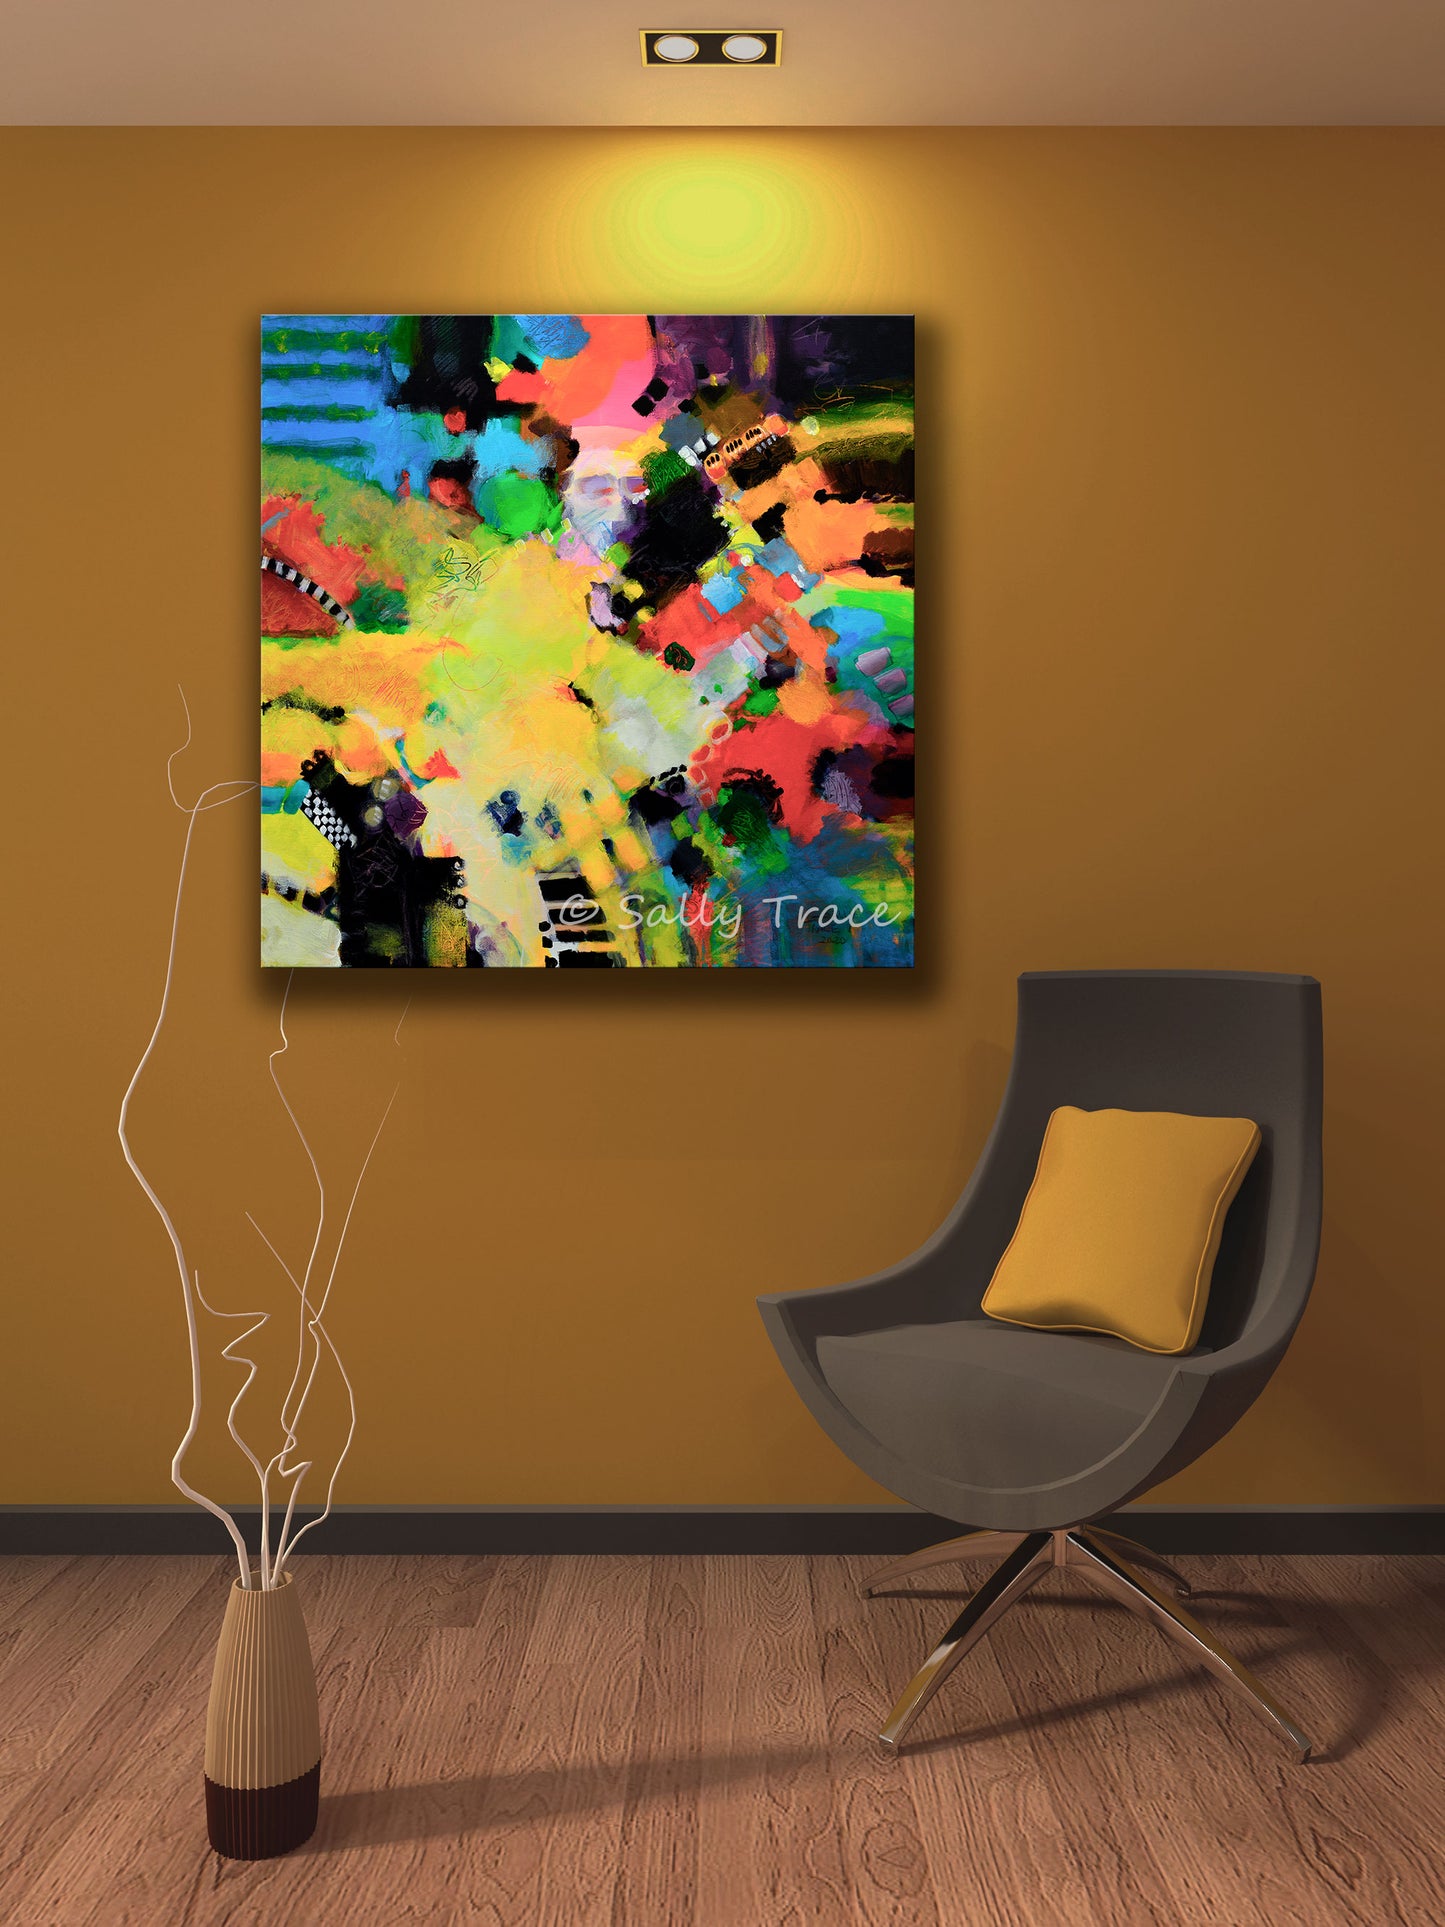 Free form color field abstract painting print by Sally Trace